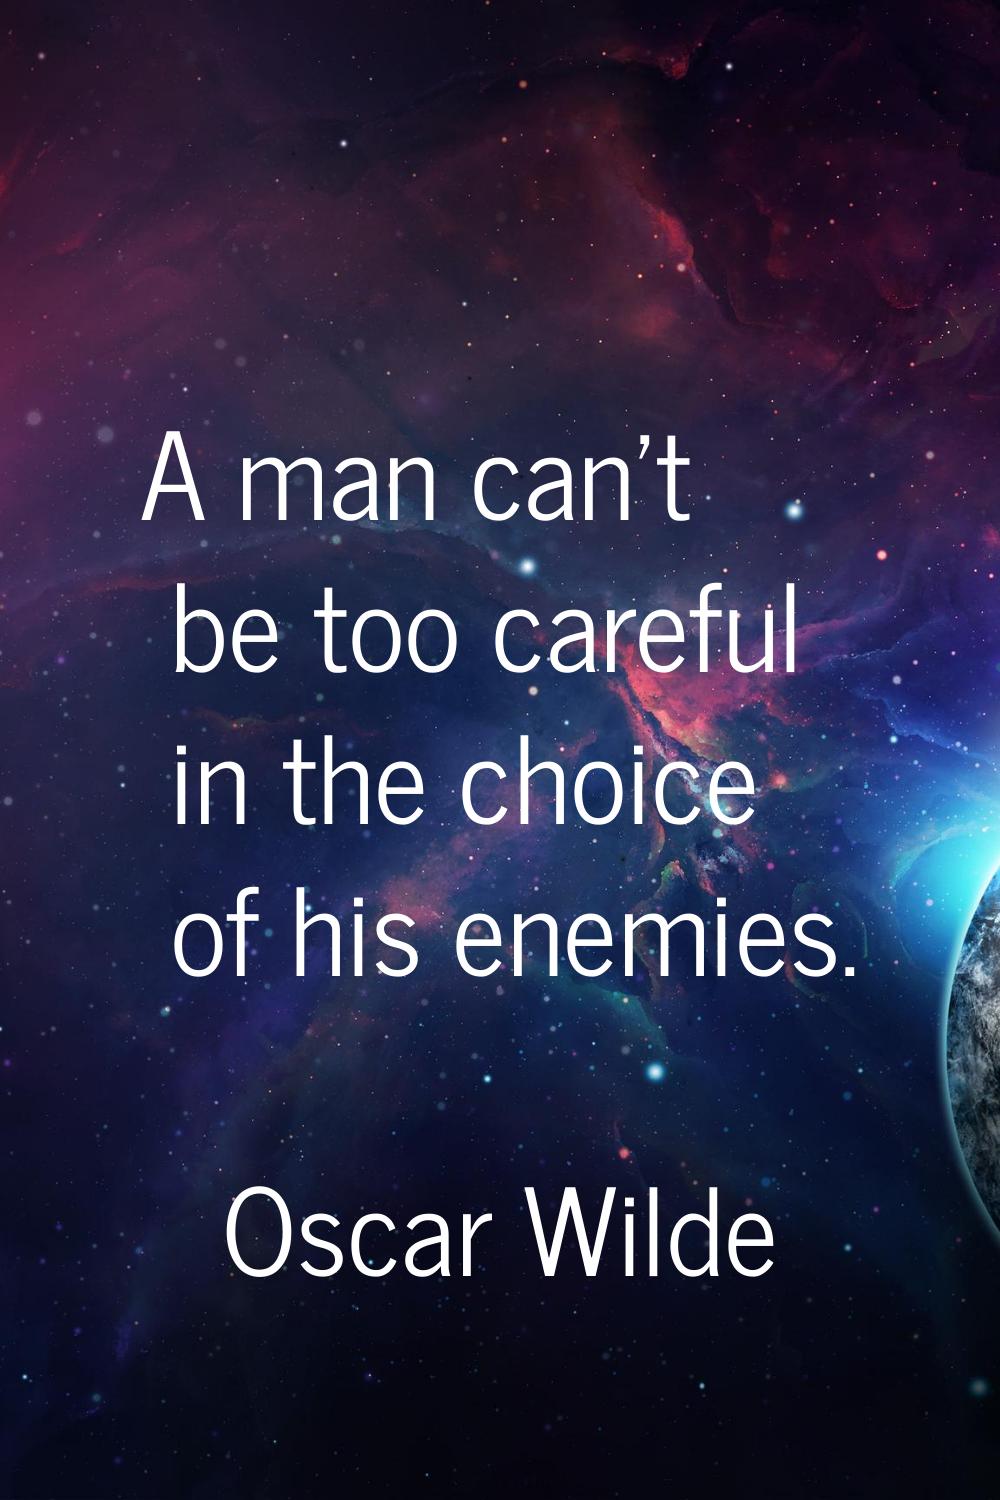 A man can't be too careful in the choice of his enemies.